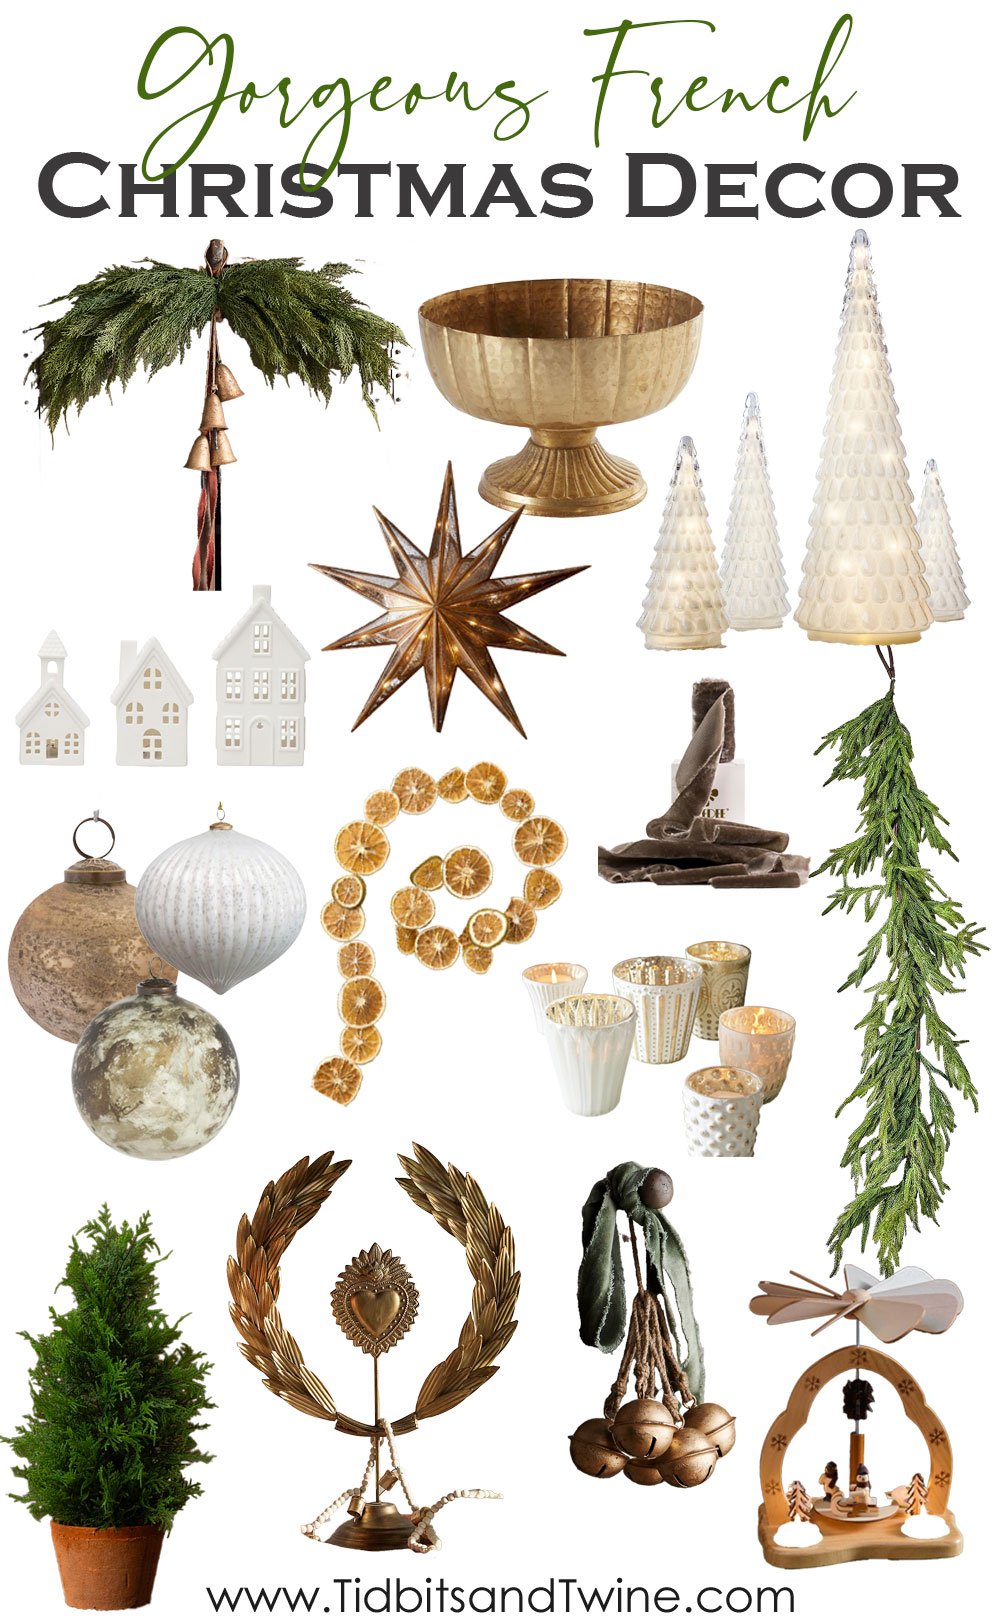 curated image of gorgeous french christmas decor for the home